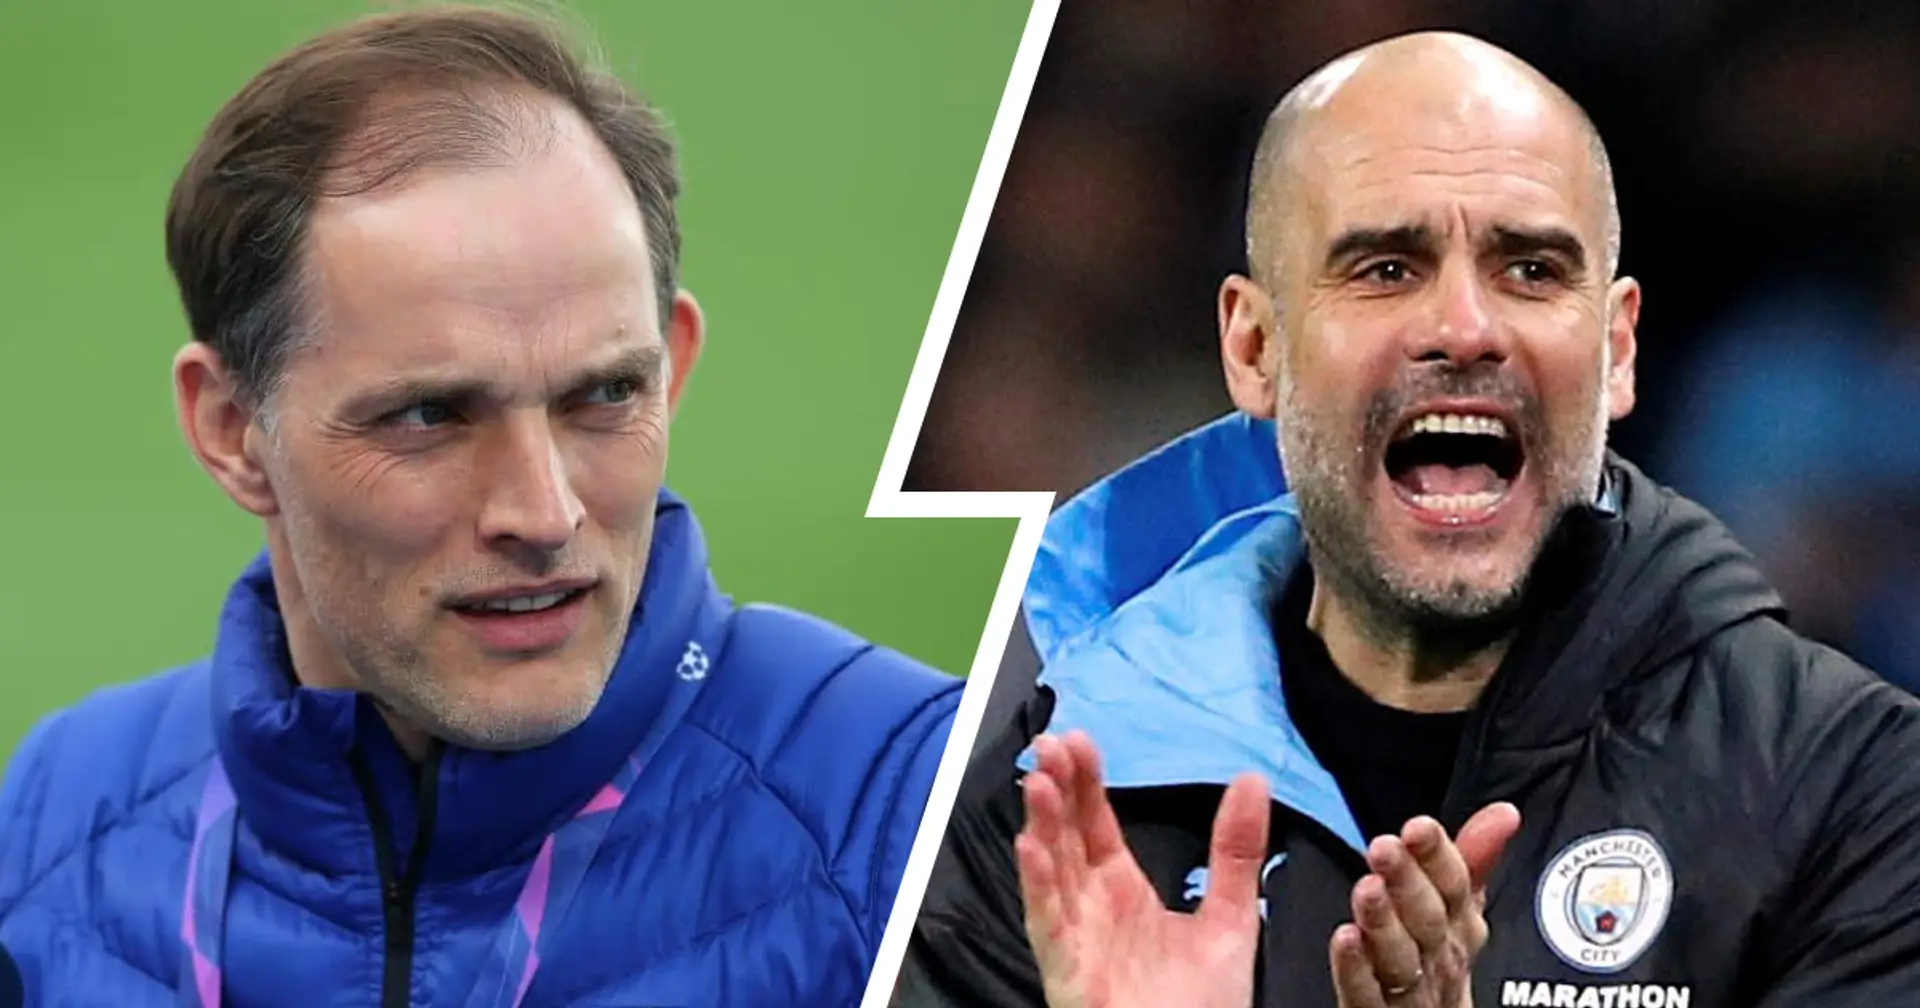 Old rivalry re-ignited: A brief history of Thomas Tuchel's relationship with Pep Guardiola